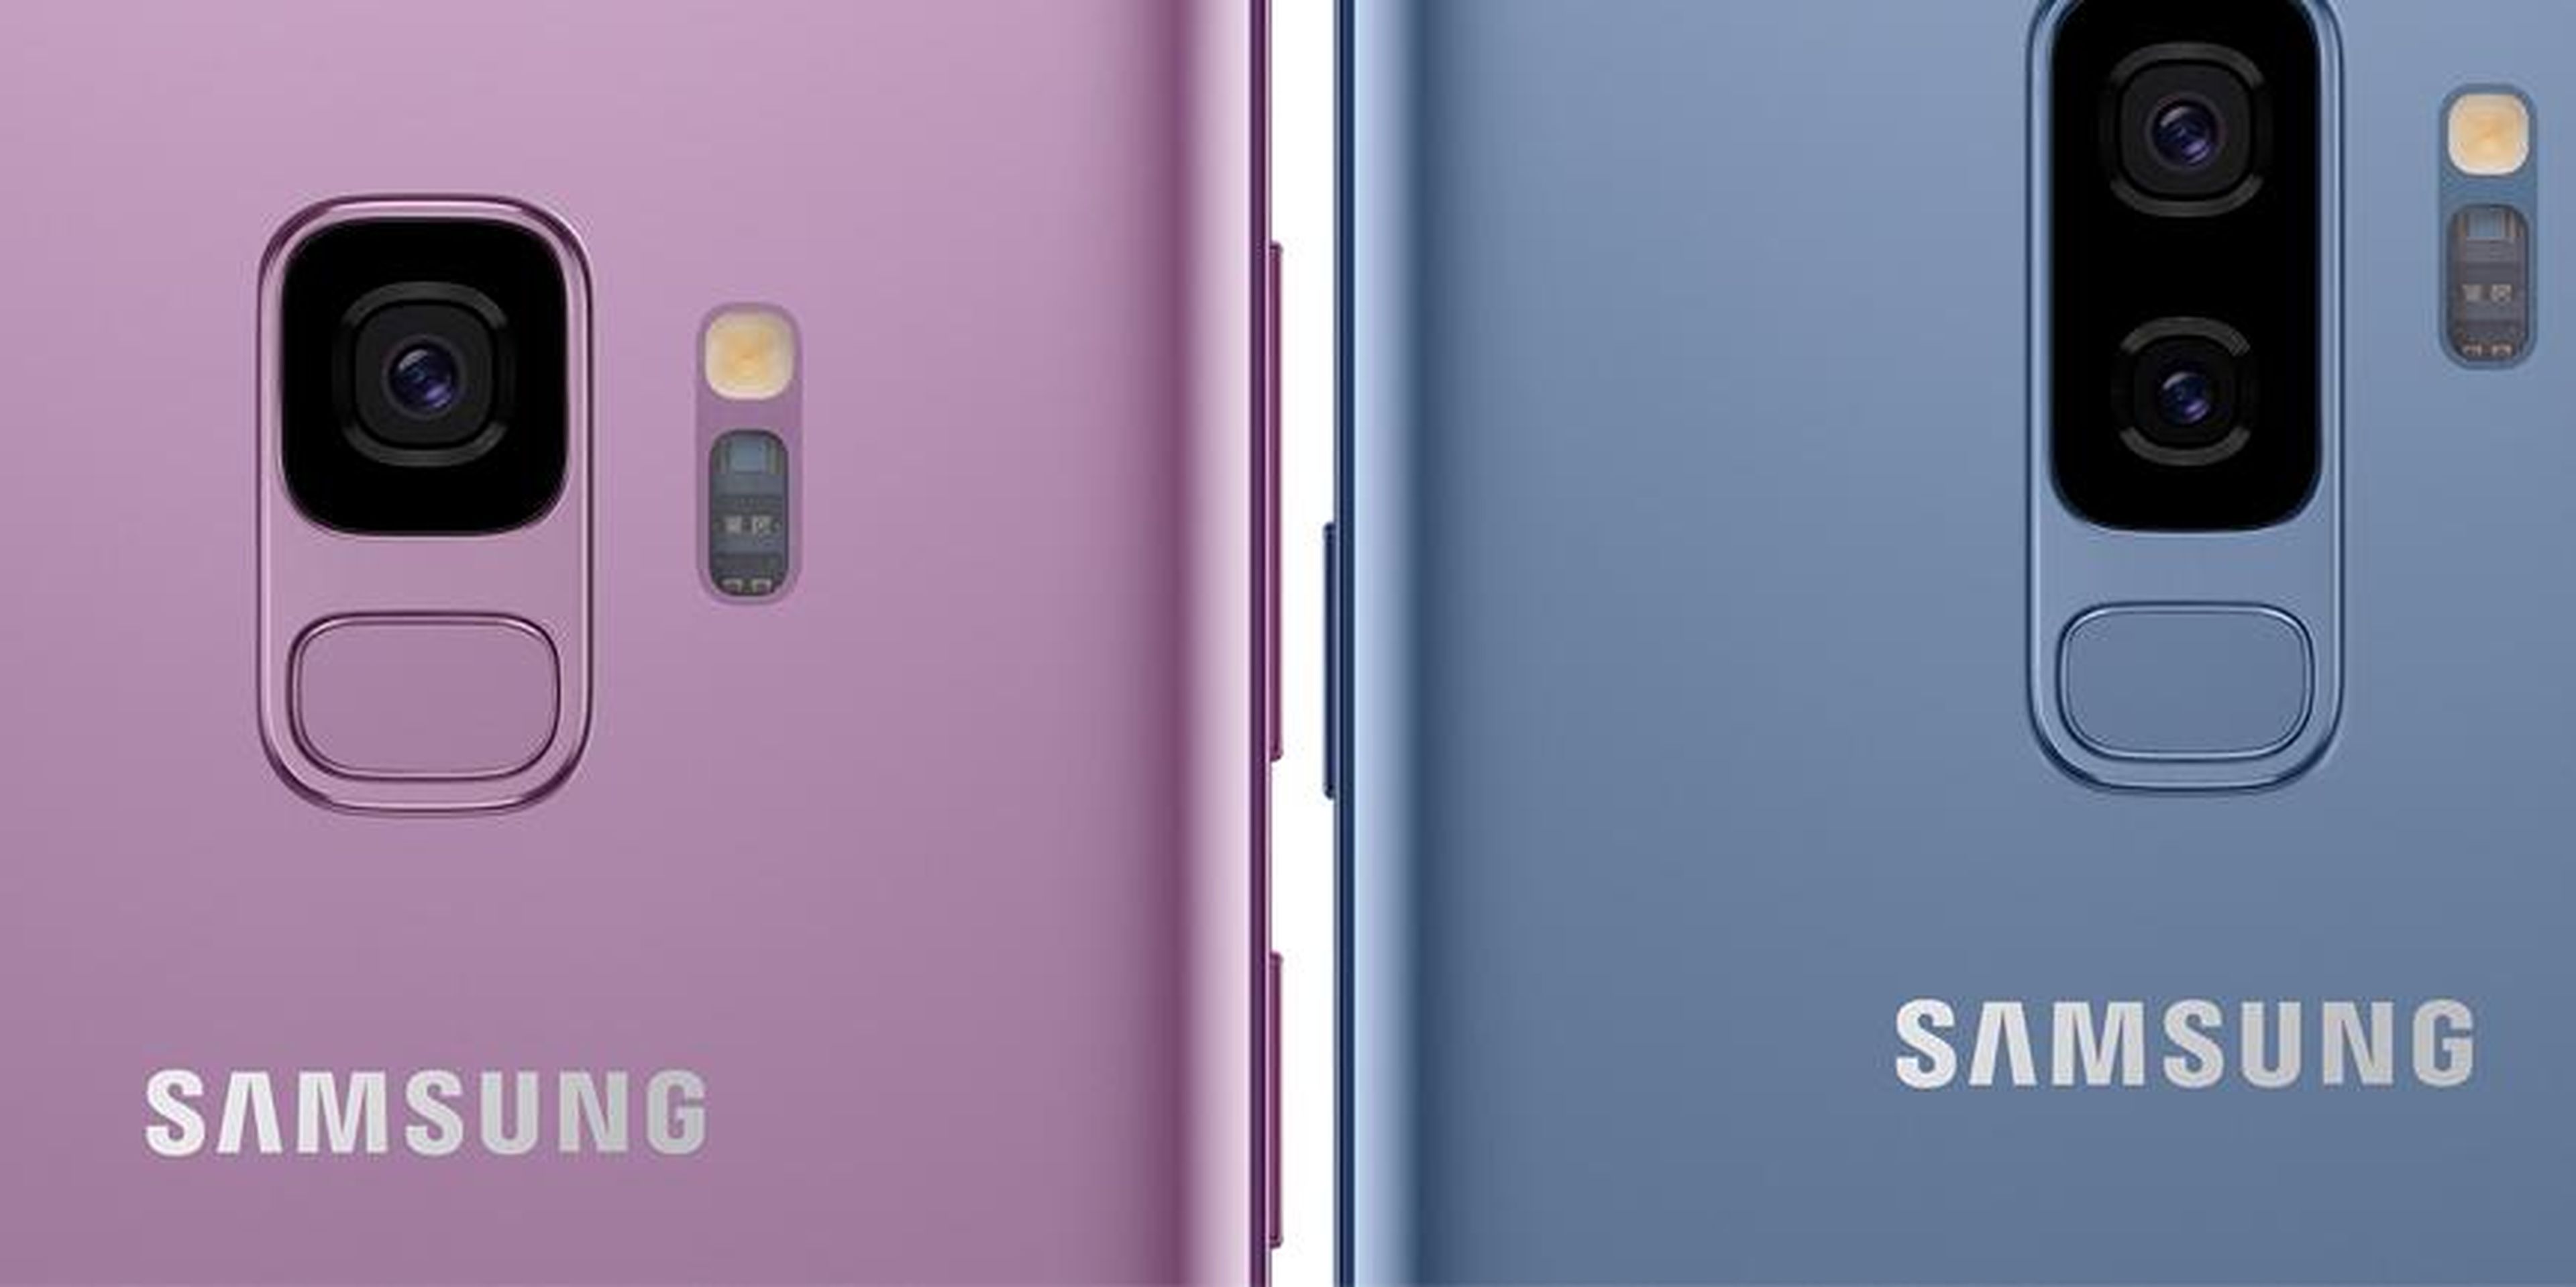 The Samsung Galaxy S10 is rumored to have a bunch of new features, including a triple-lens camera — here's everything we know so far